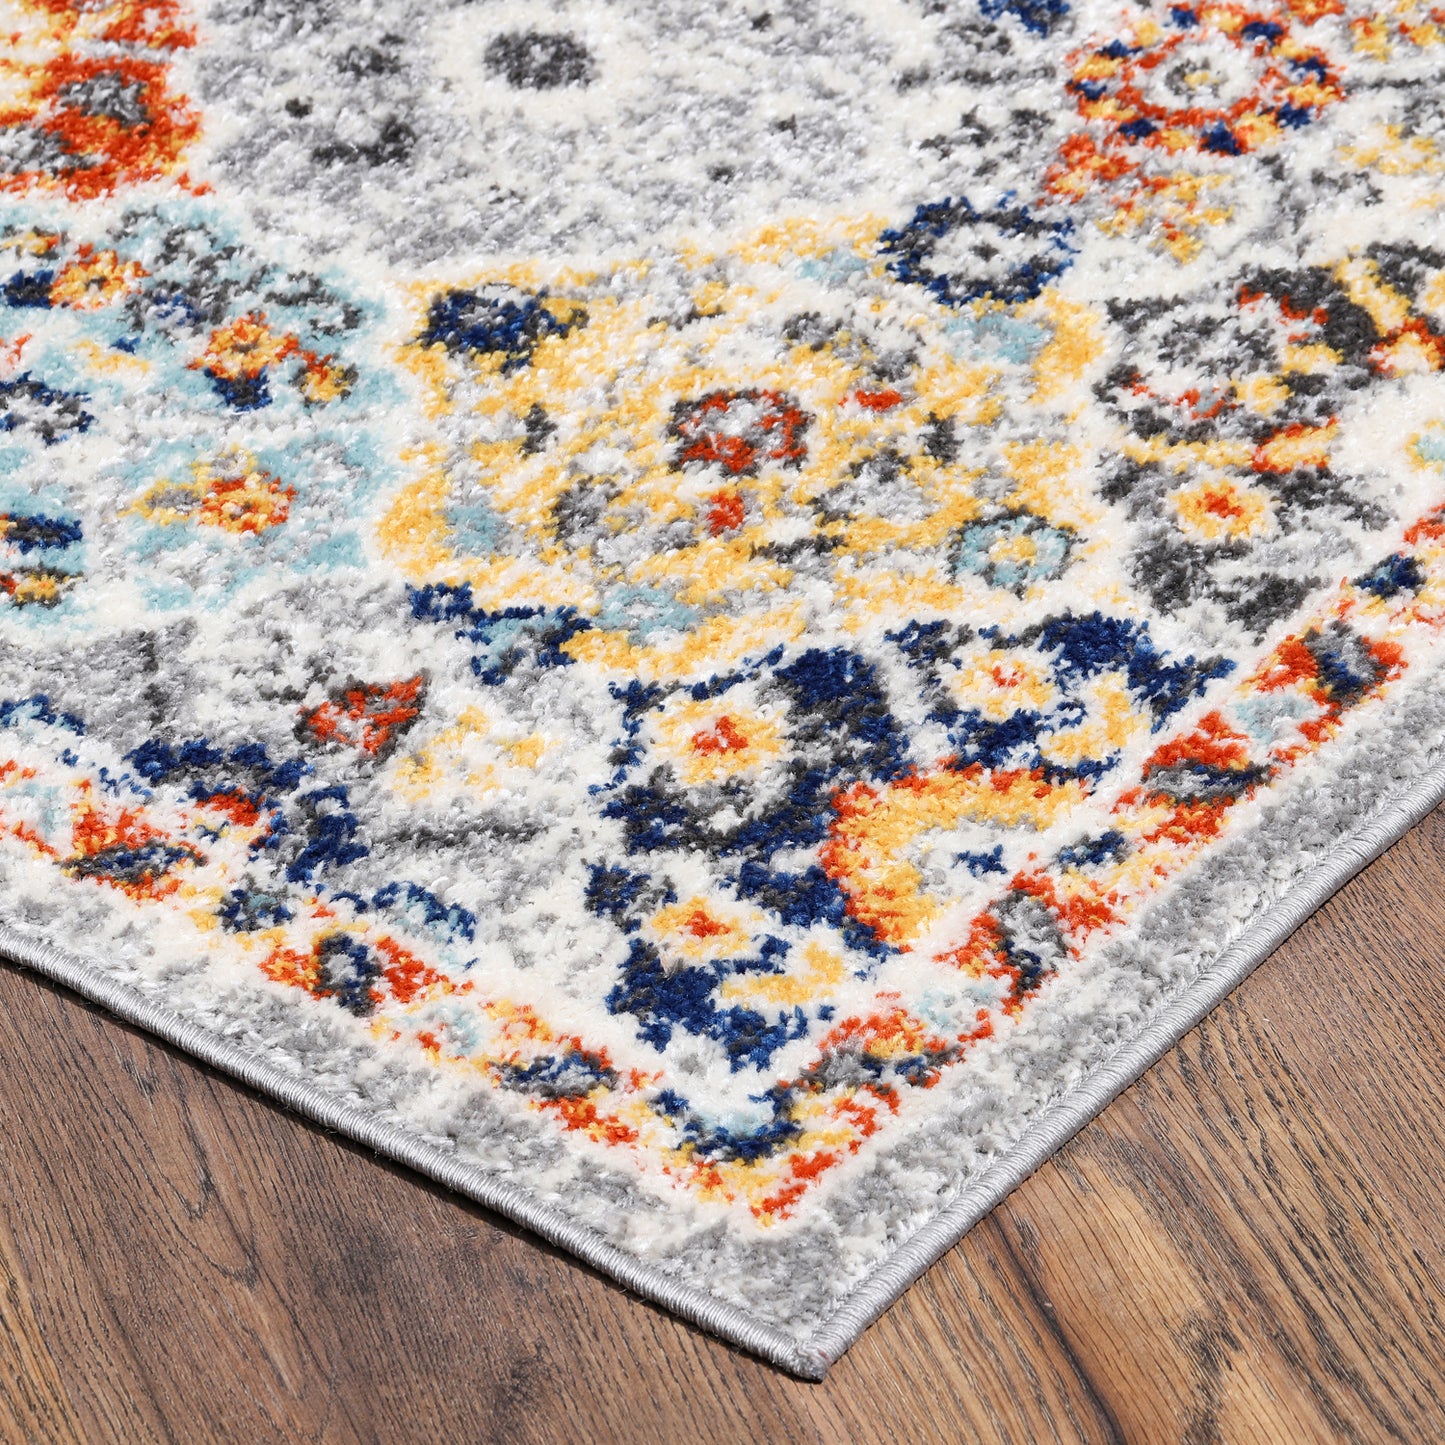 EVIVA Blossom White and Light Gray Area Rug in 3X5